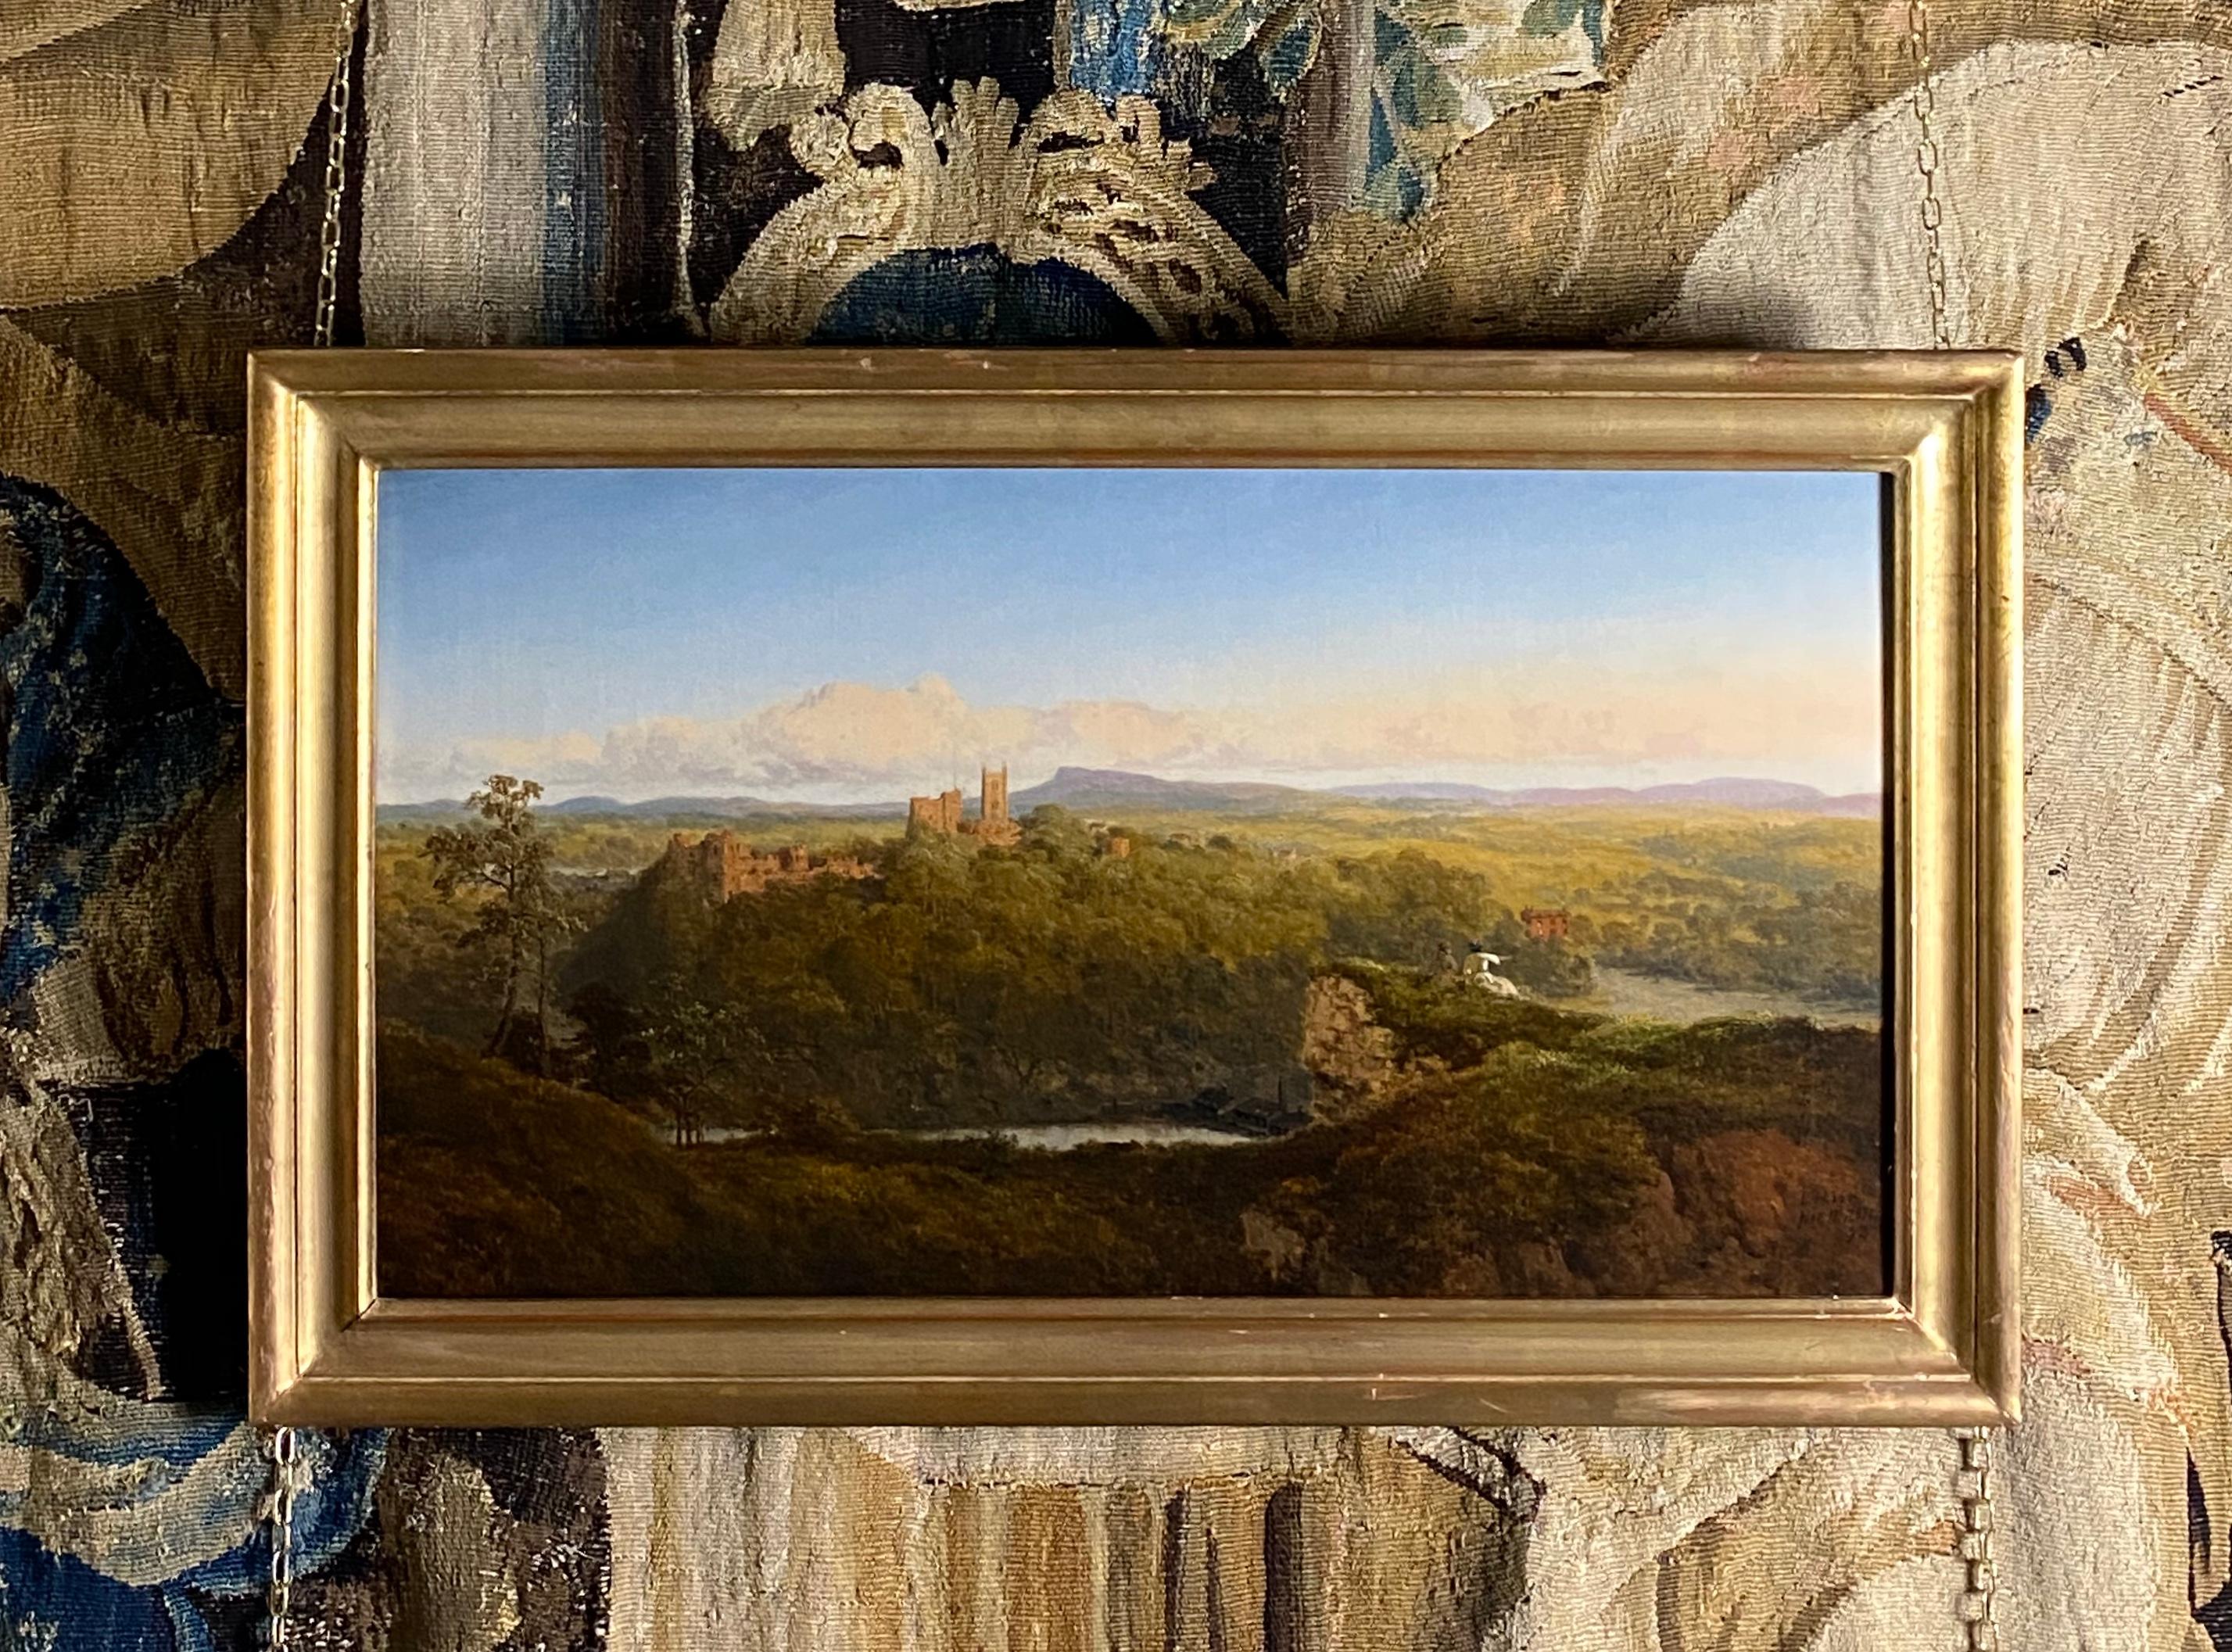 A highly desirable and romantic oil on canvas landscape study of Ludlow Castle (one of the finest medieval ruins in England) by celebrated English artist Edmund John Niemann (1813 - 1876) signed Niemann 1872

The Castle, firstly a Norman Fortress